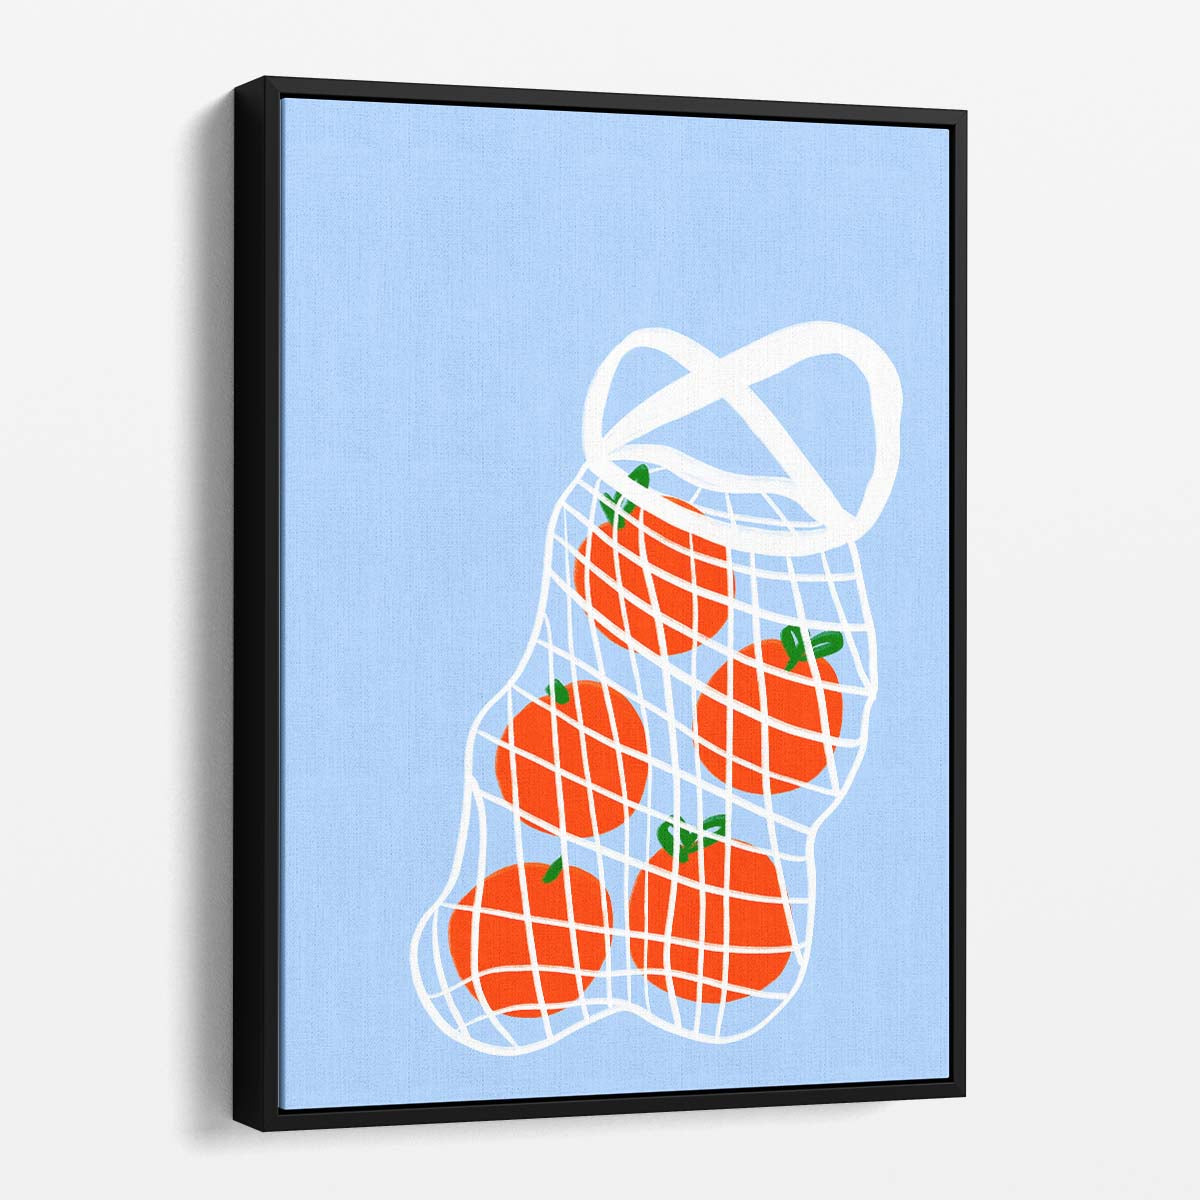 Minimalistic Orange Net Illustration - Colorful Kitchen Wall Art by Luxuriance Designs, made in USA